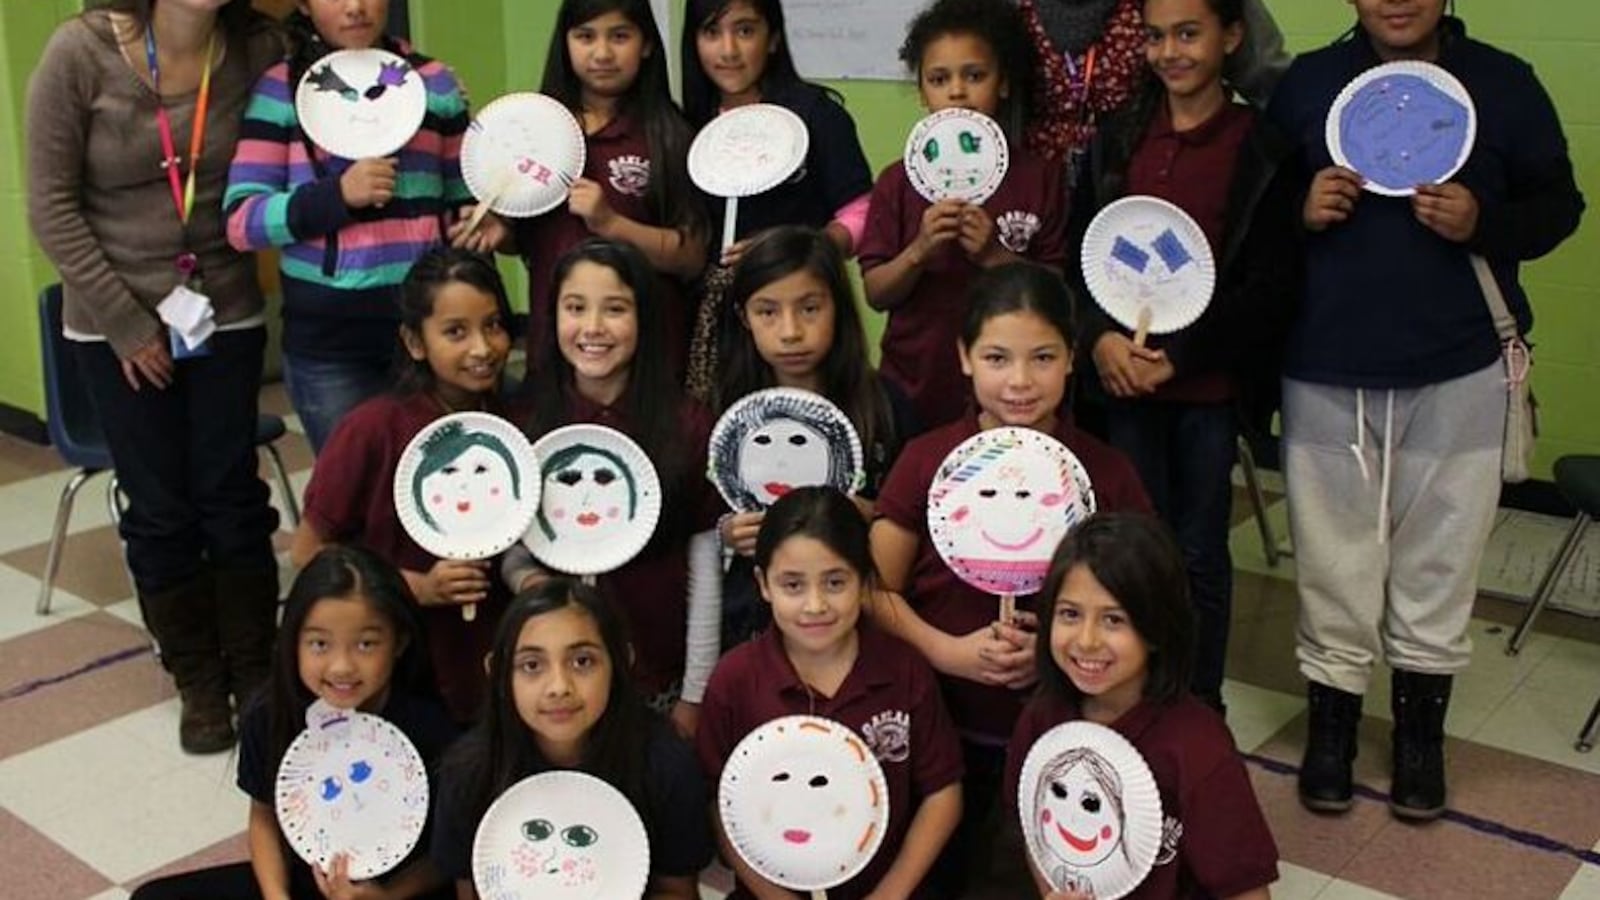 Students at Oakland Elementary hold up masks they decorated to represent who they are on the inside. The activity was part of one of the school's preventative programs for girls. (Photo courtesy of Oakland)